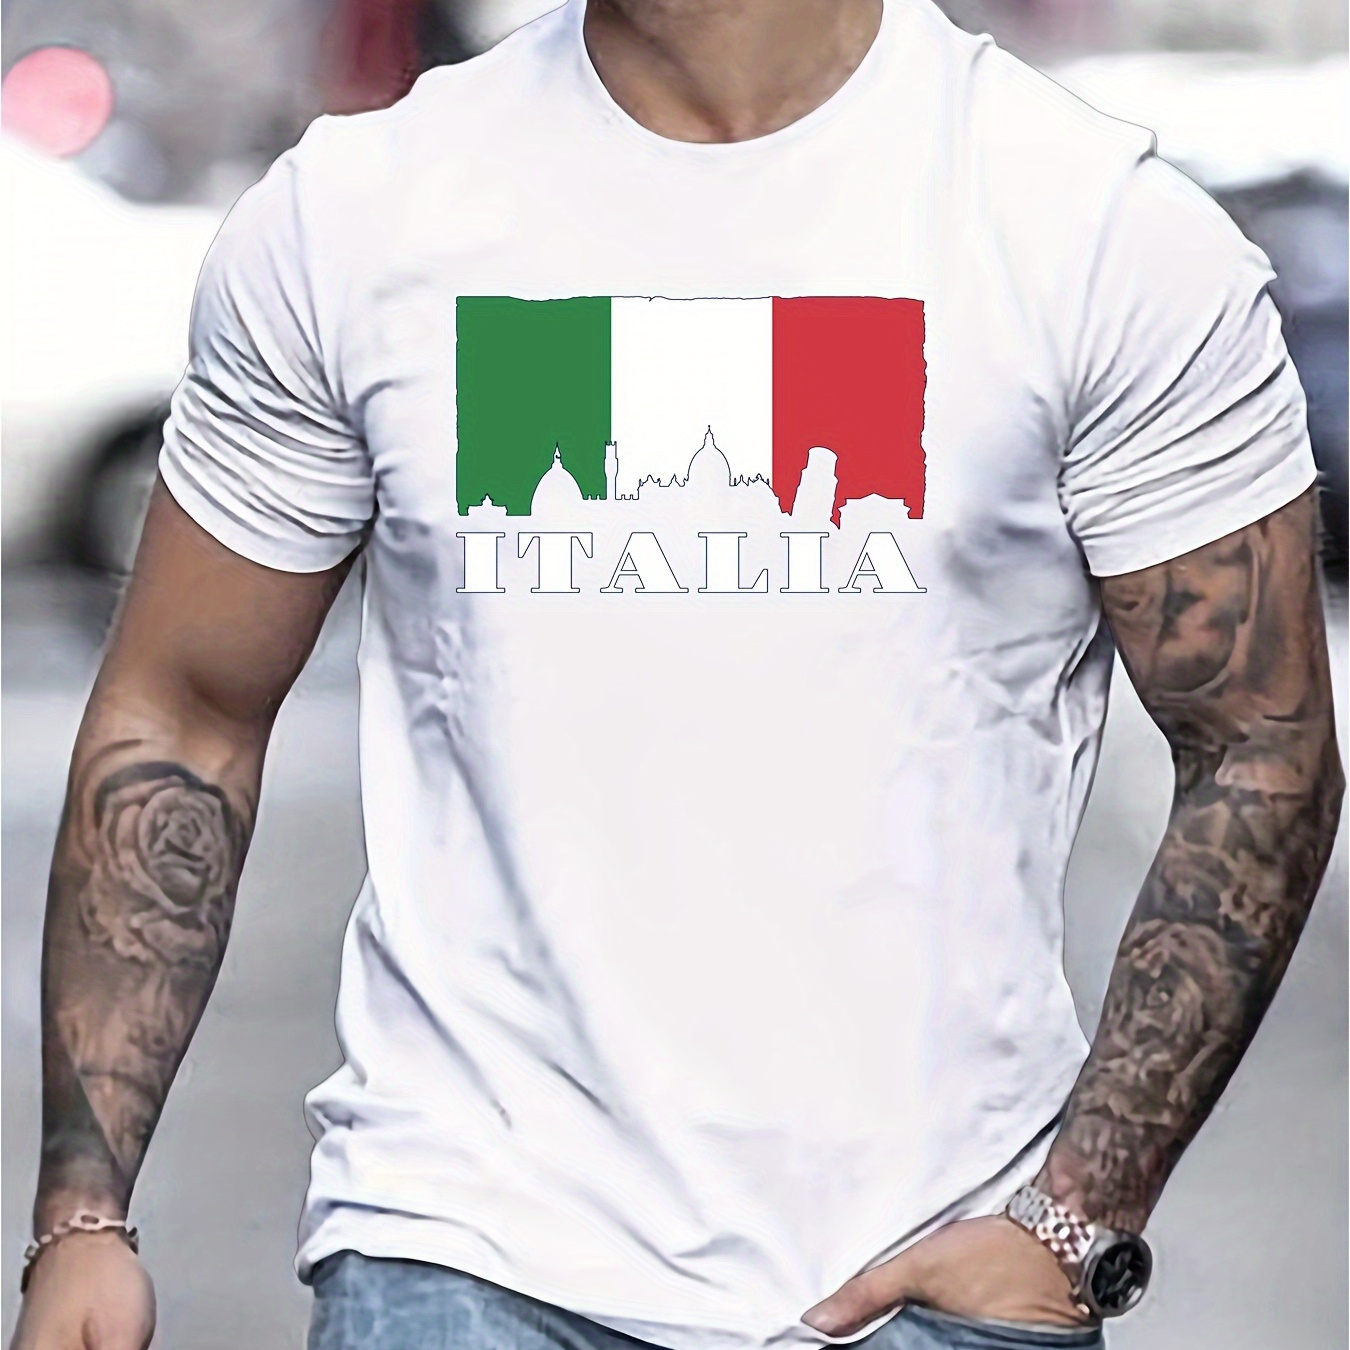 

Italy Print Tee Shirt, Tees For Men, Casual Short Sleeve T-shirt For Summer